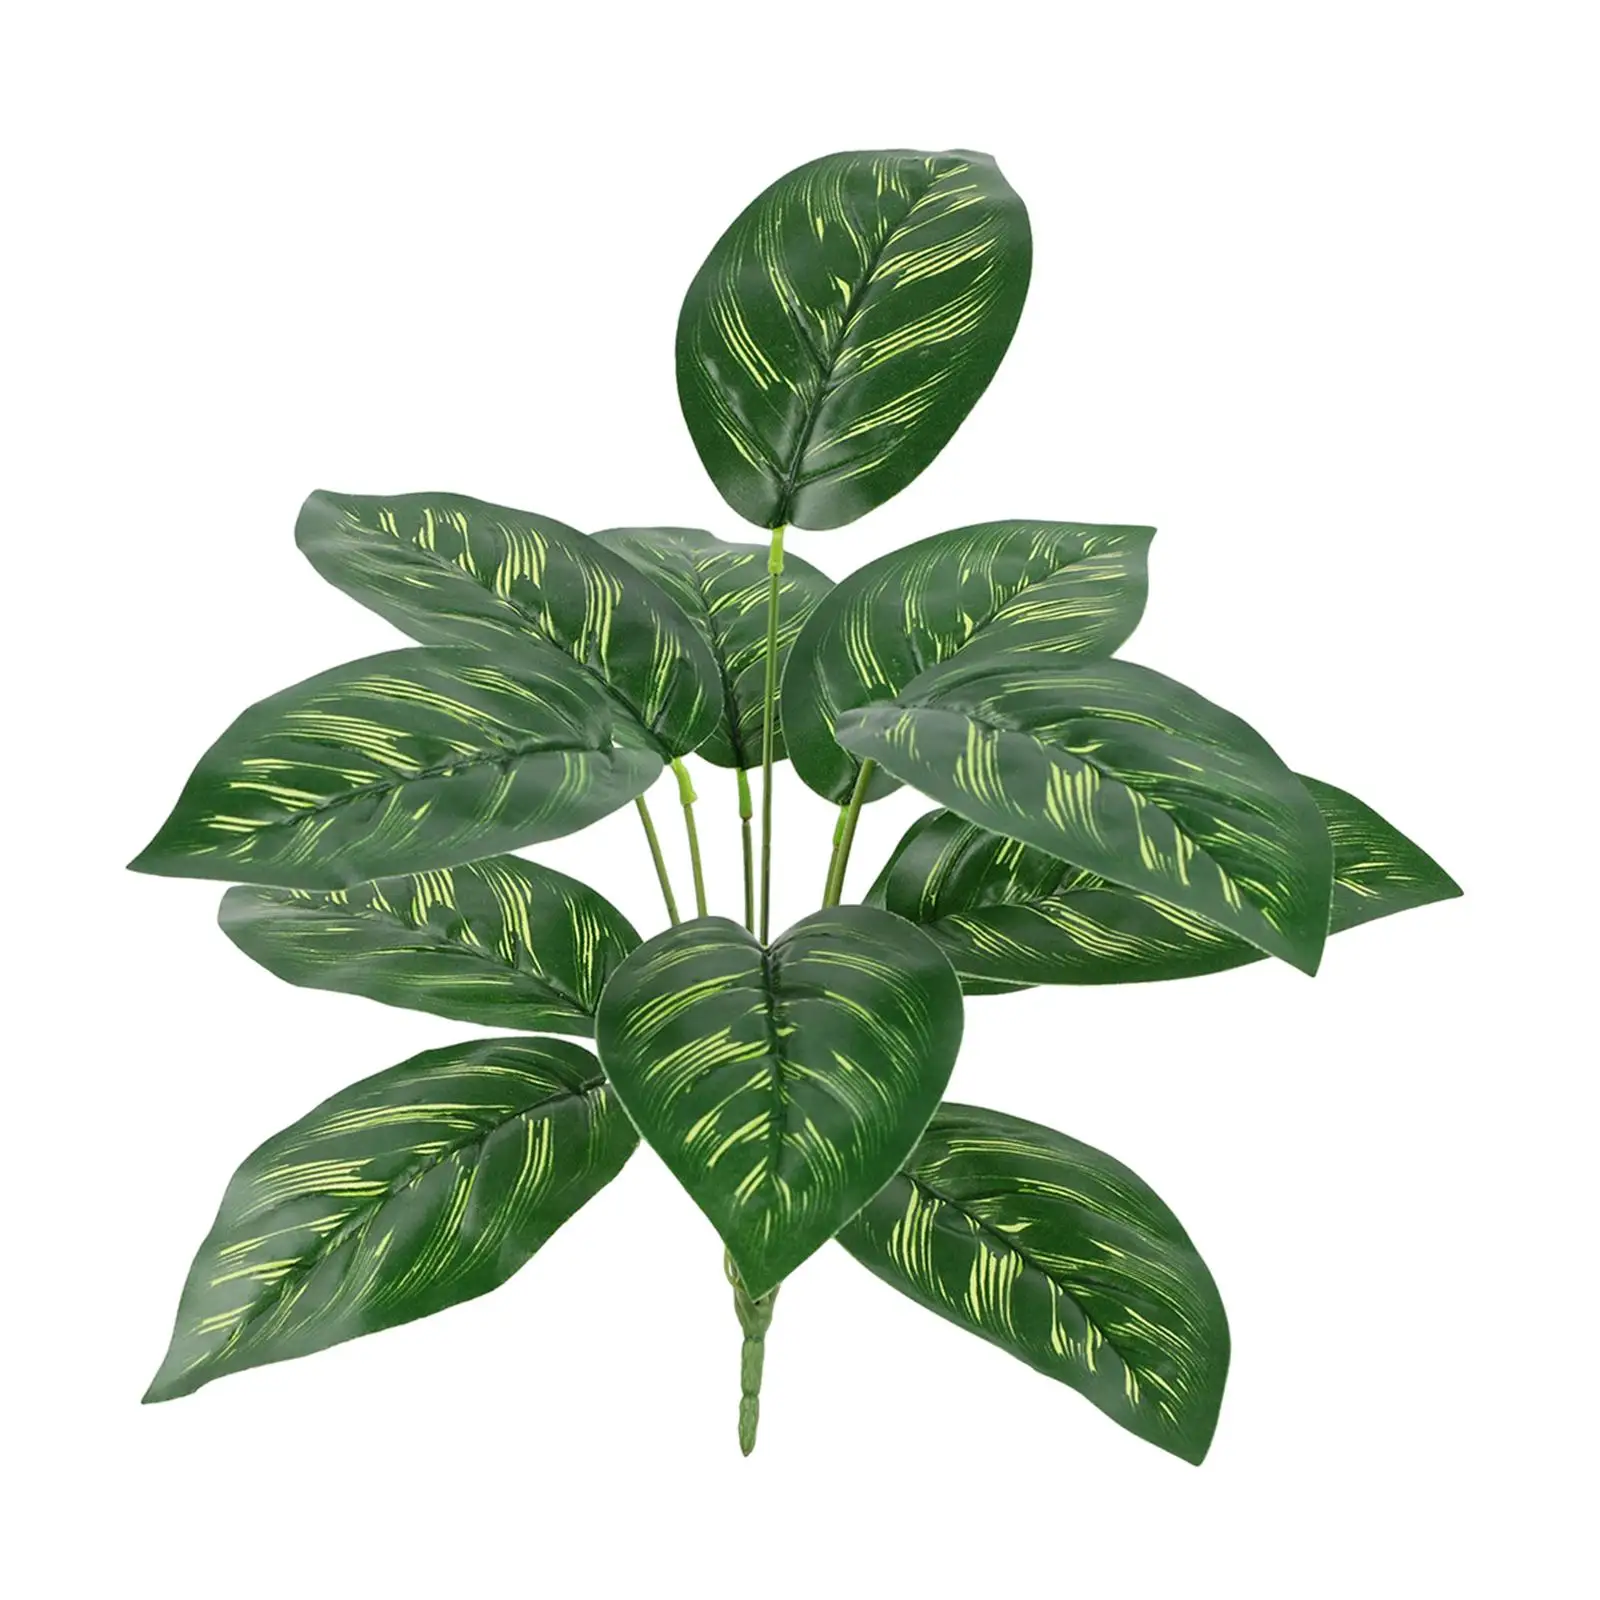 Faux Plants Realistic Green Greenery Decoration Home Decor Garden Decoration for Desk Living Room Indoor Bathroom Office